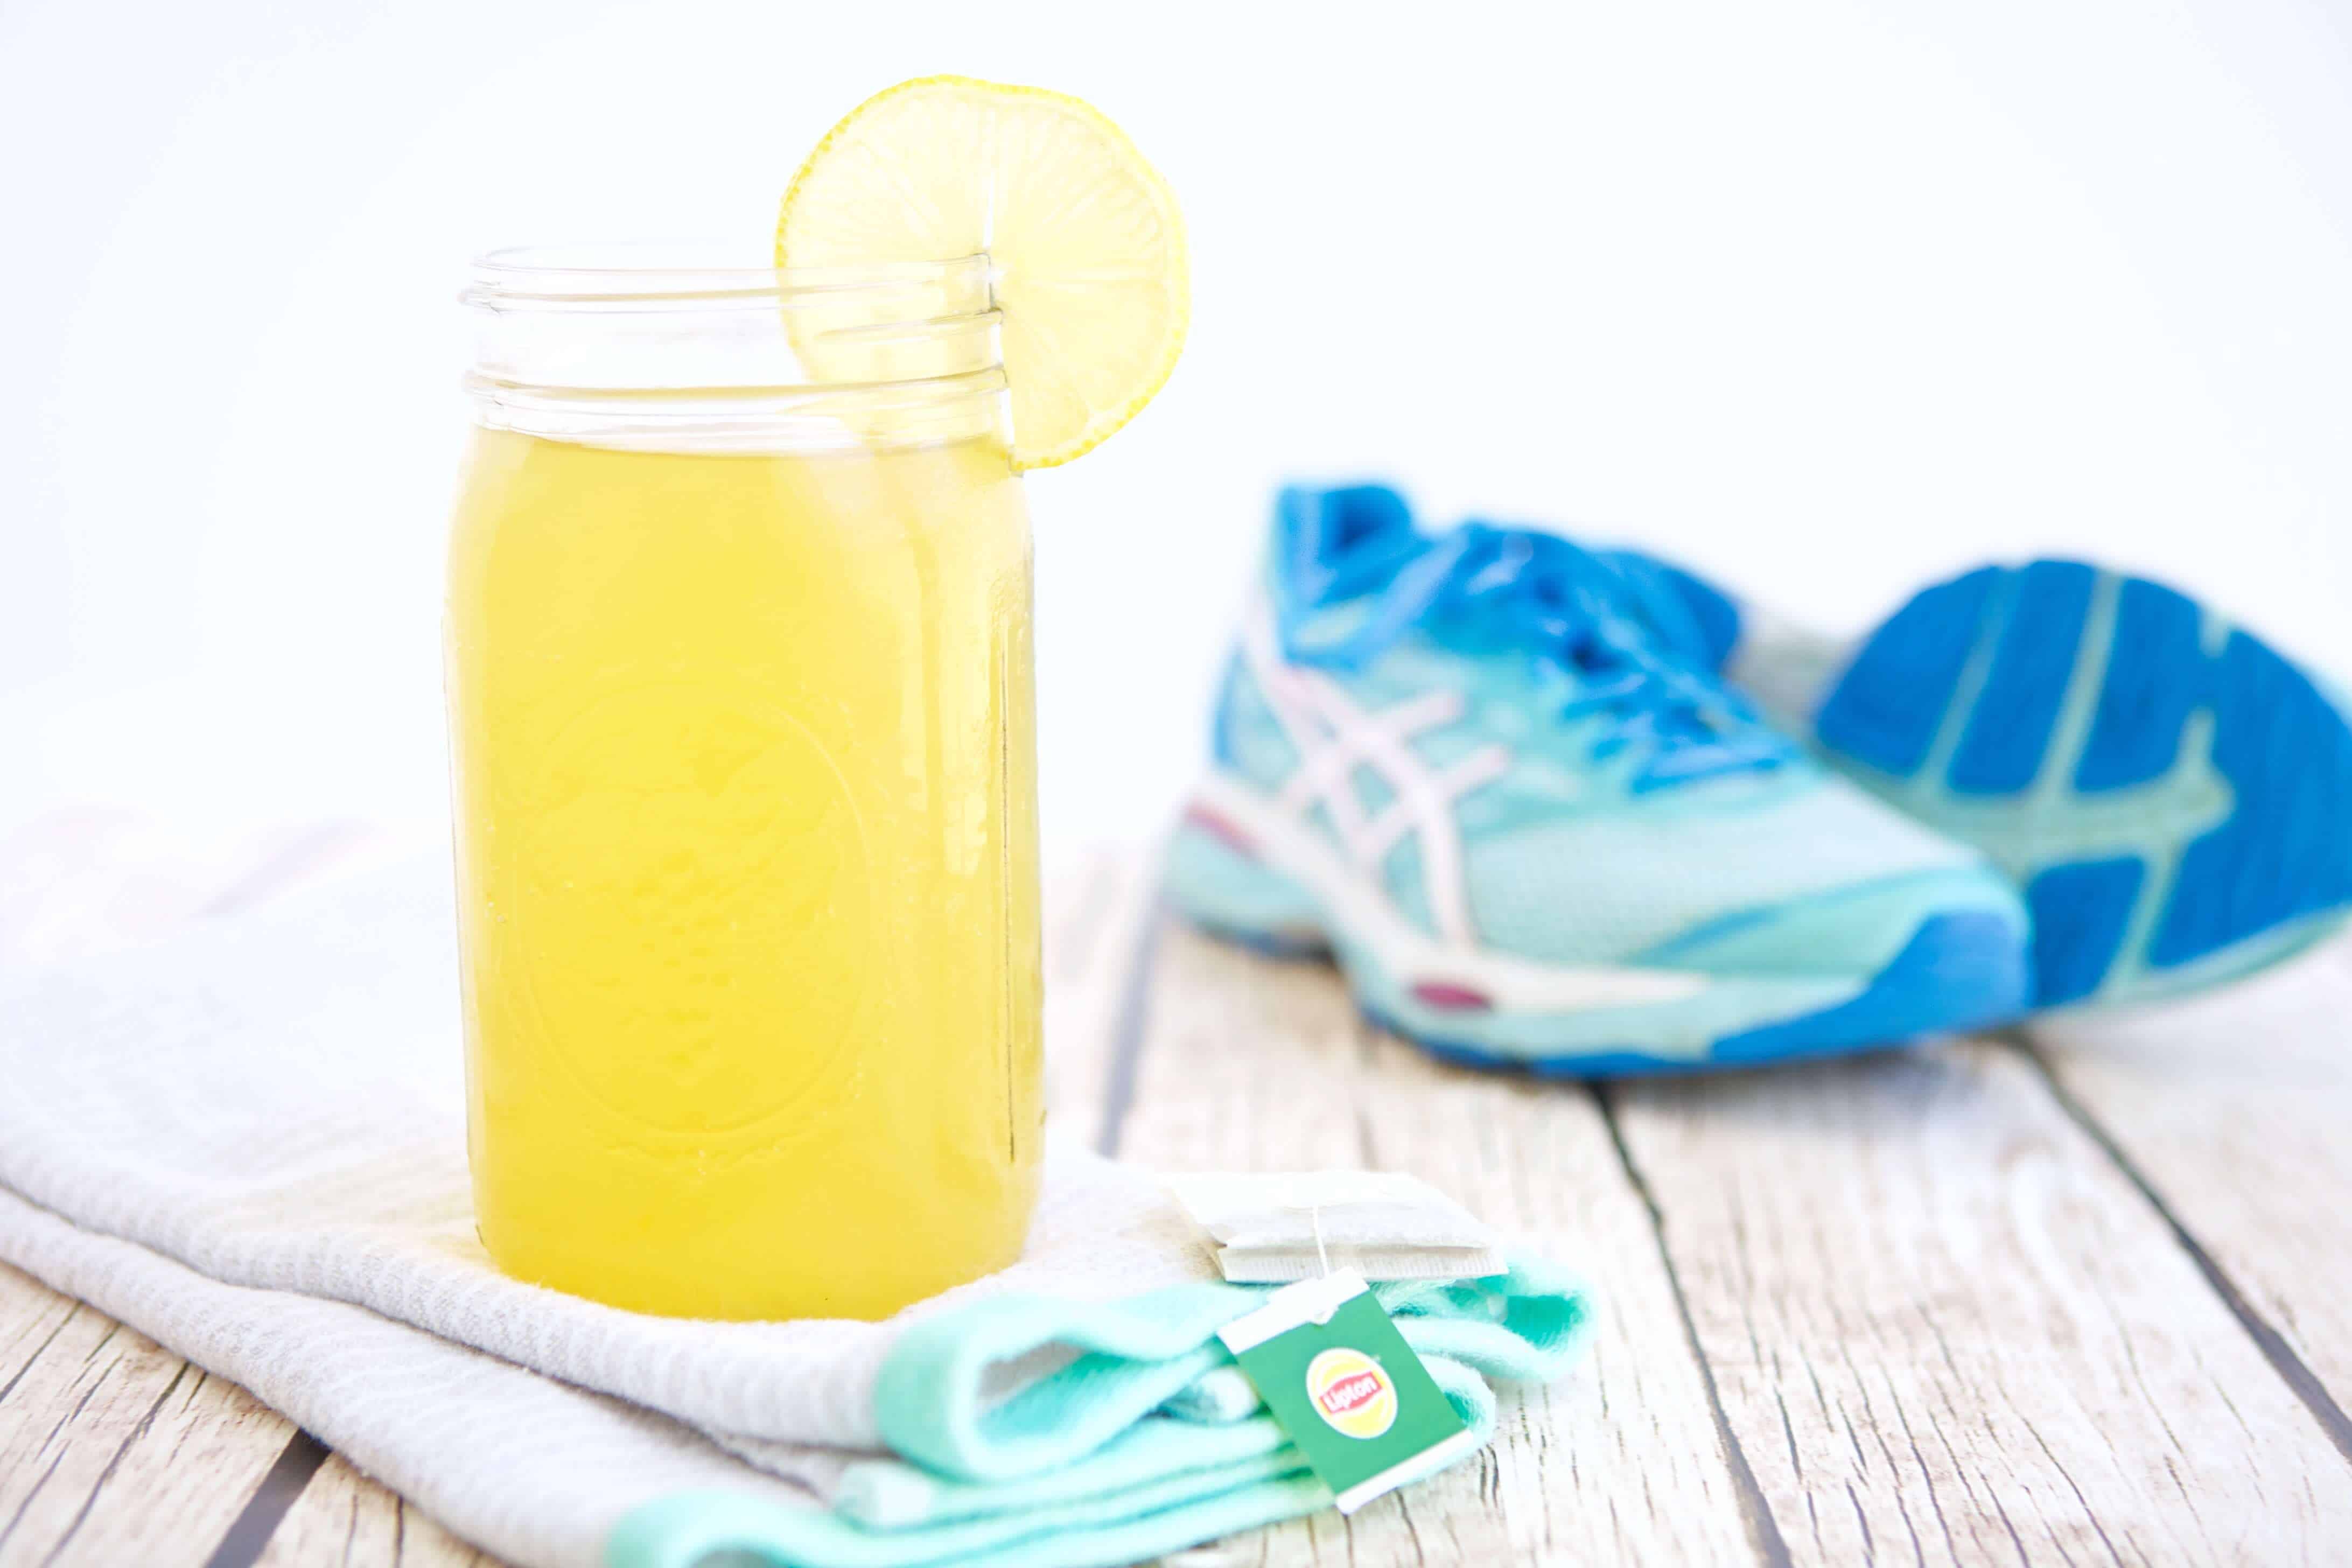 This is an all-natural, homemade sports drink that's easy to whip up before a workout. Each ingredient plays an important role in fueling your fitness.